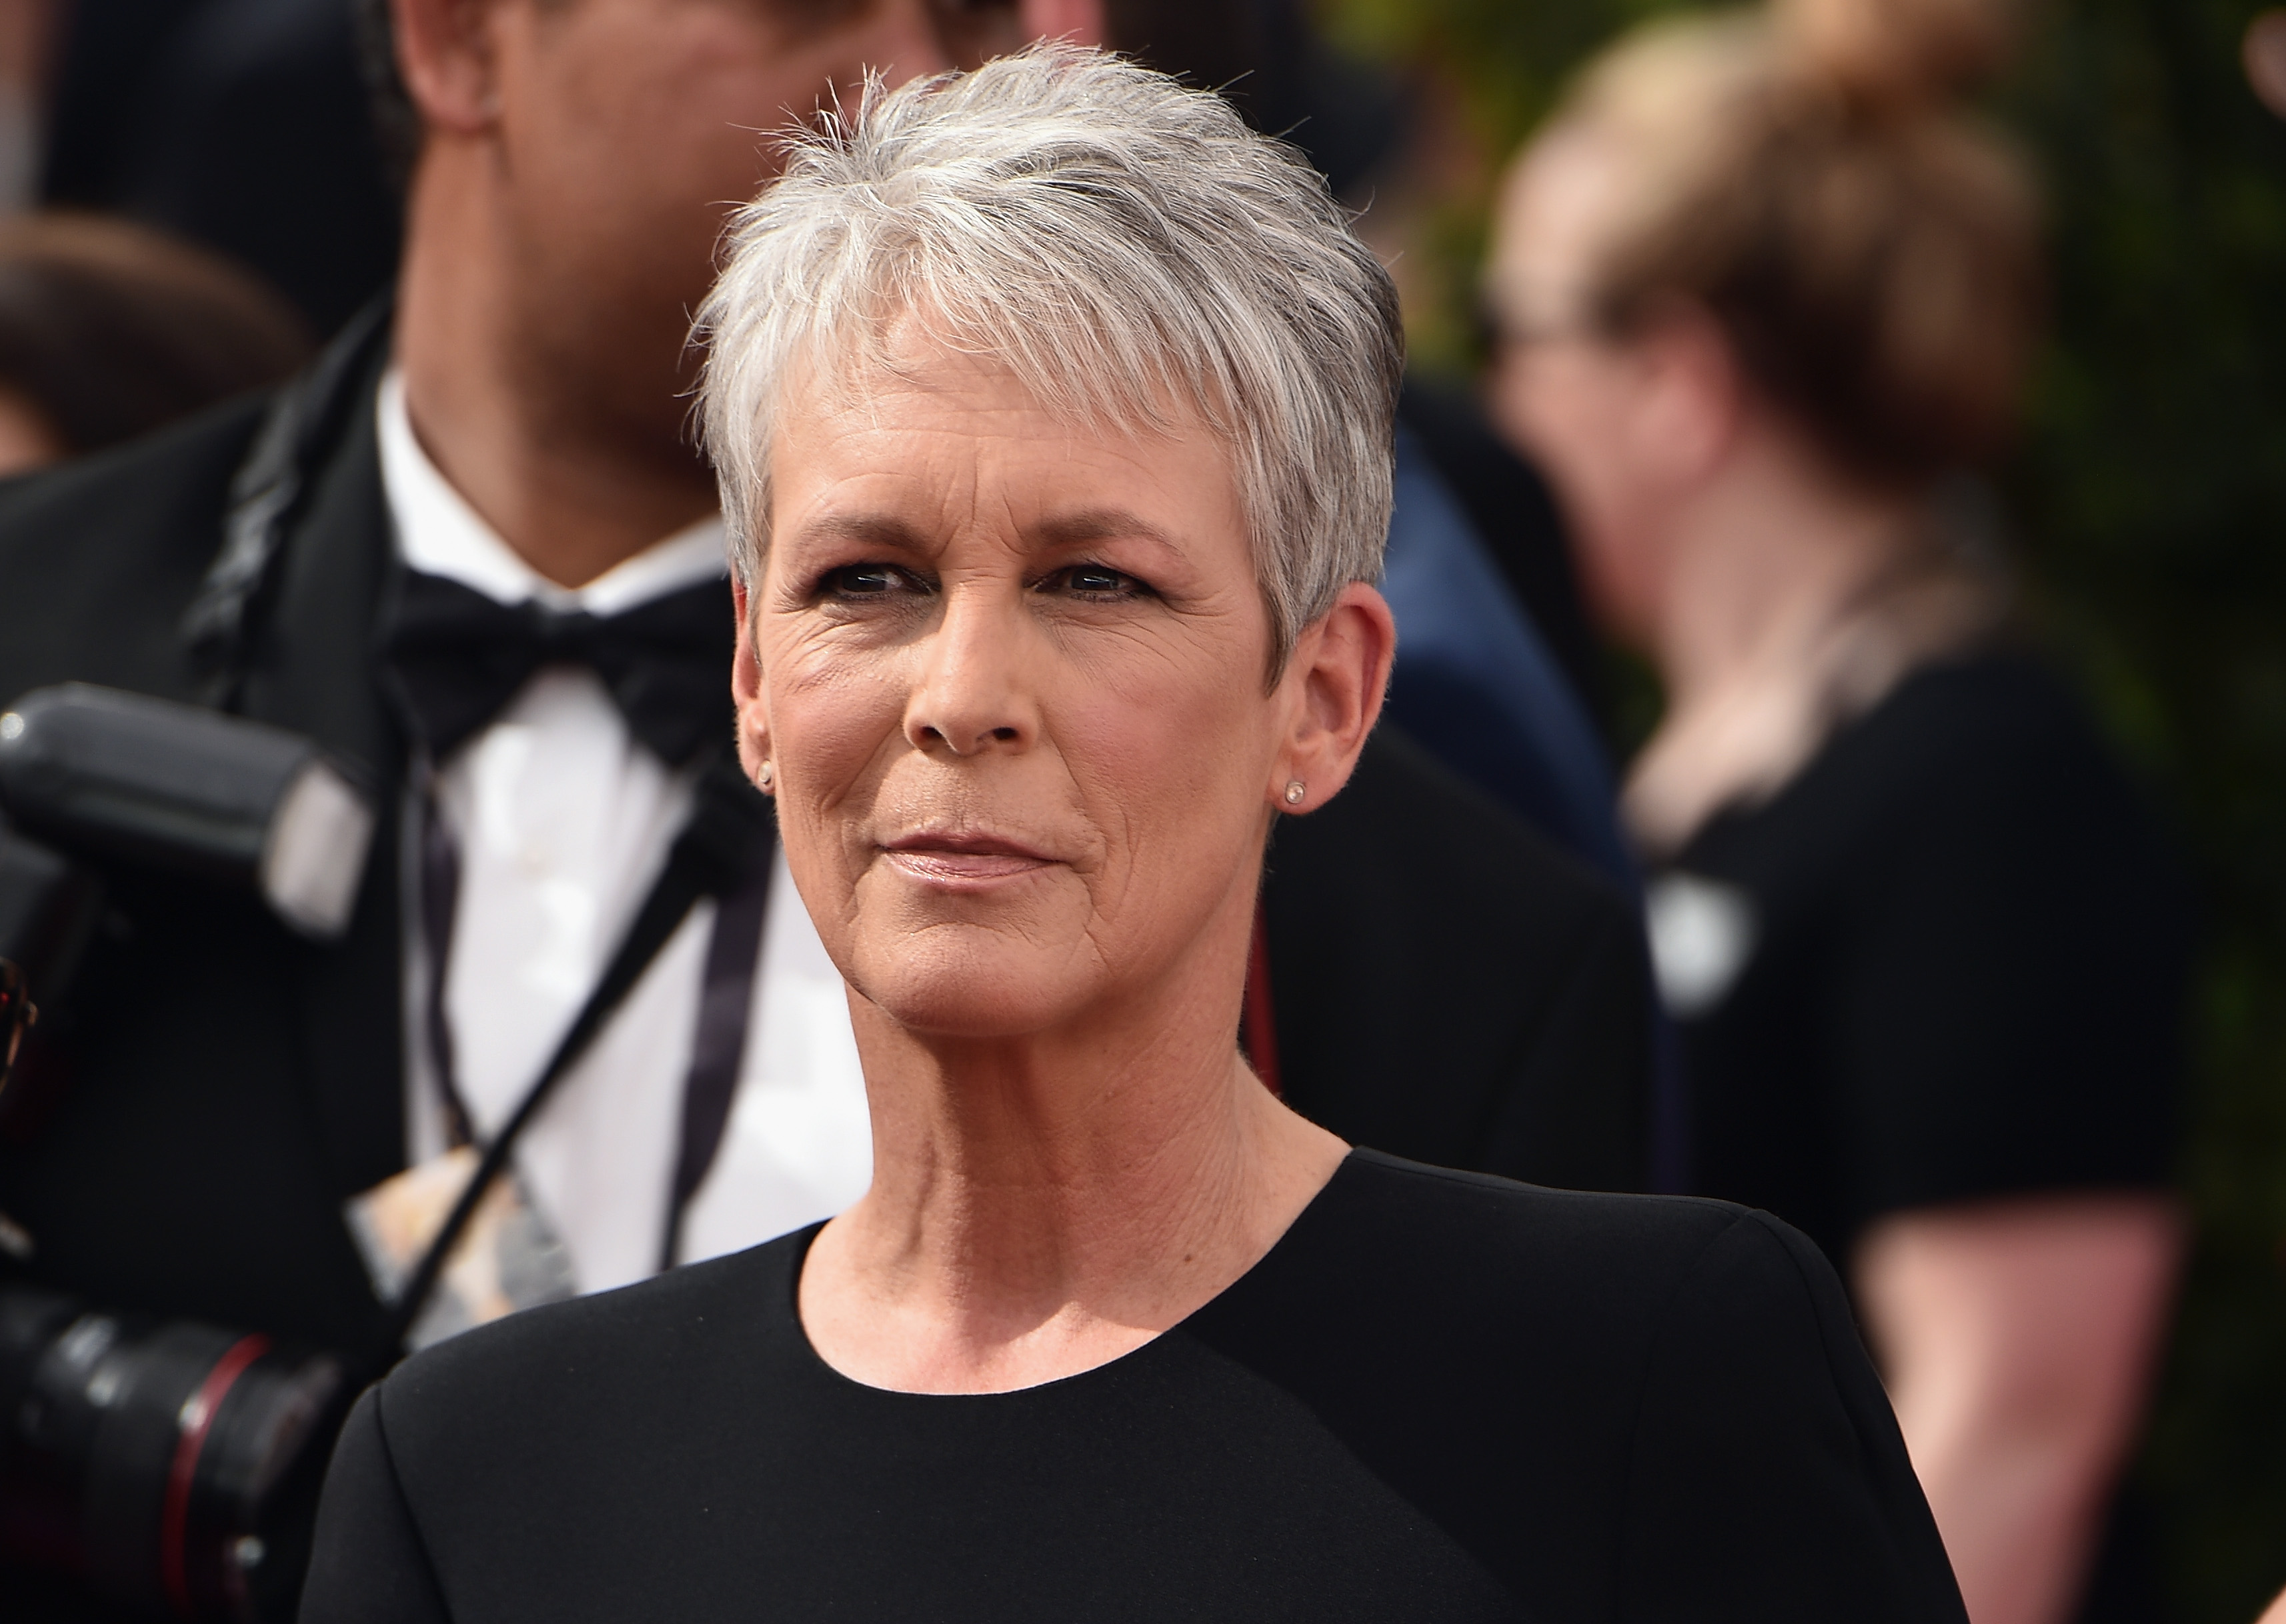 Jamie Lee Curtis at the 67th Annual Primetime Emmy Awards on September 20, 2015, in Los Angeles, California | Source: Getty Images